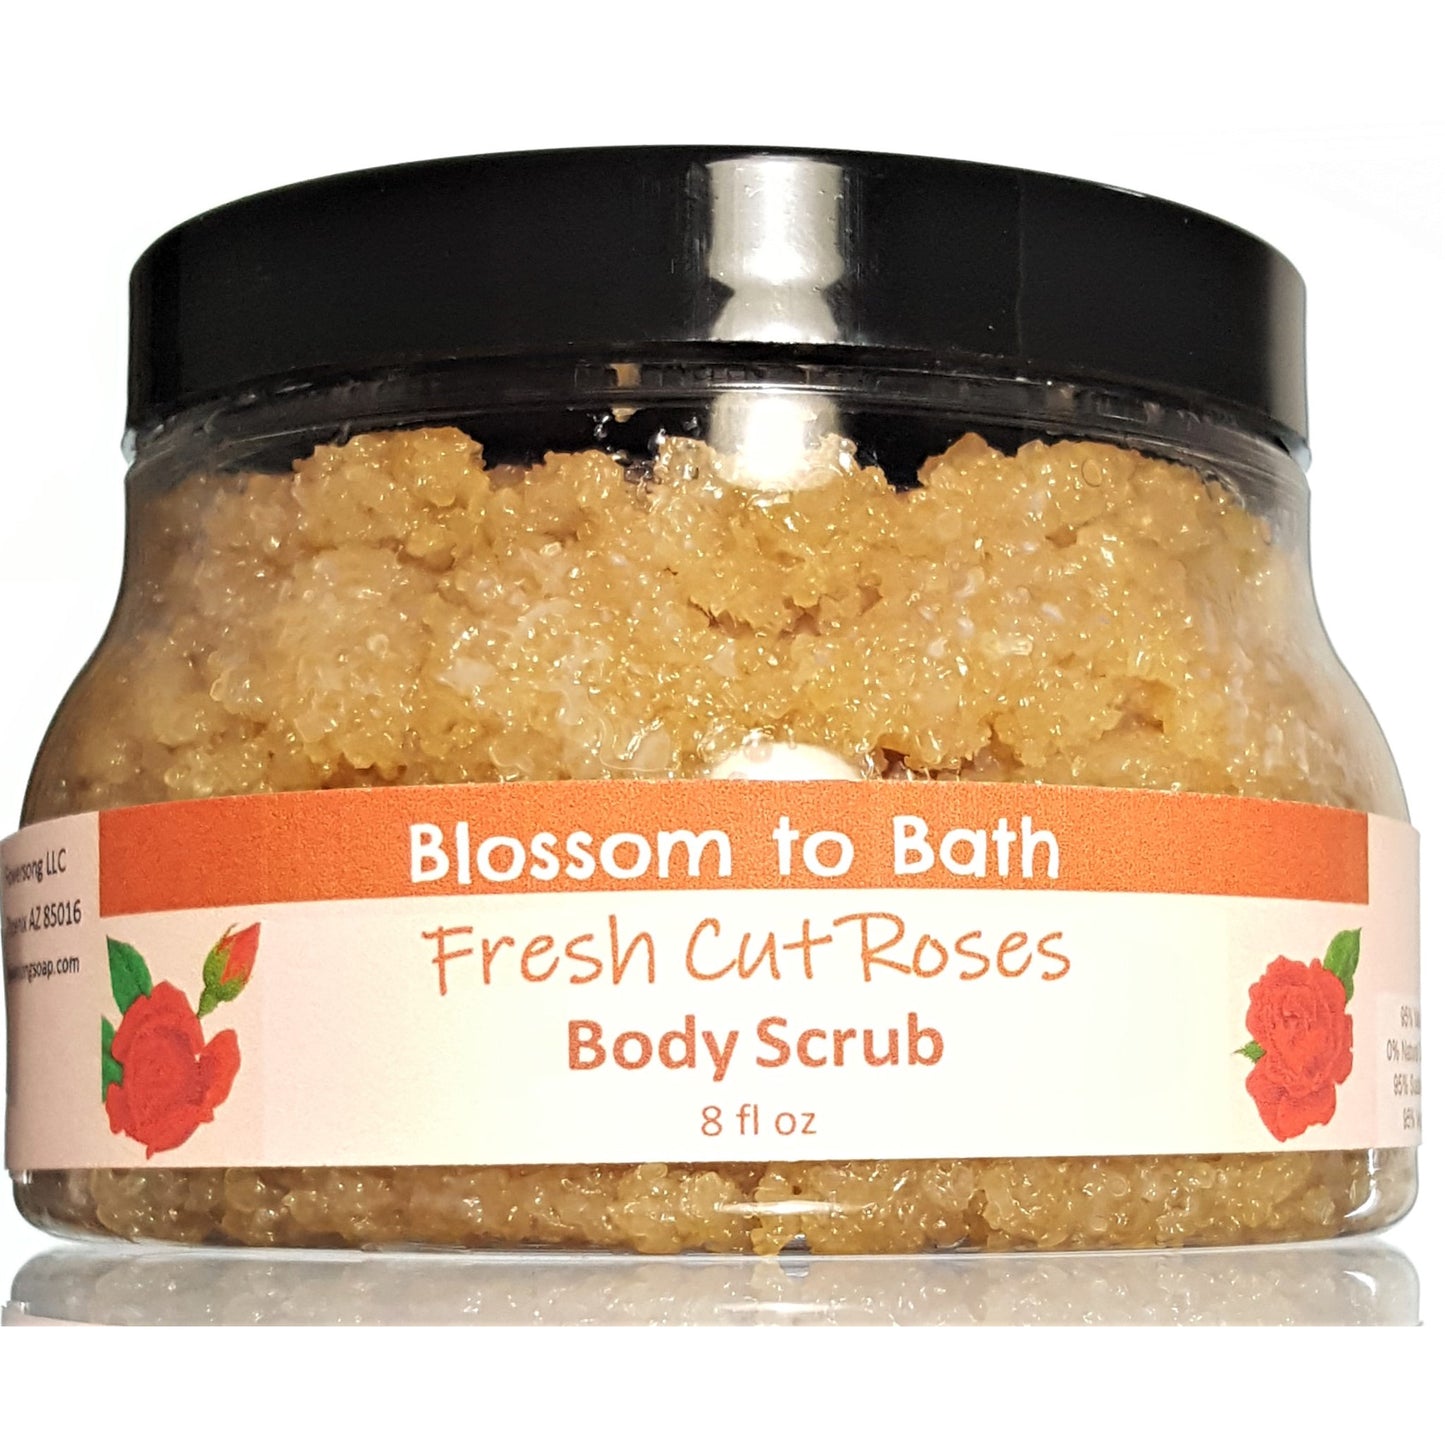 Buy Blossom to Bath Fresh Cut Roses Body Scrub from Flowersong Soap Studio.  Large crystal turbinado sugar plus  rich oils conveniently exfoliate and moisturize in one step  A true rose fragrance, the scent captures the splendor of a newly blossomed rose.